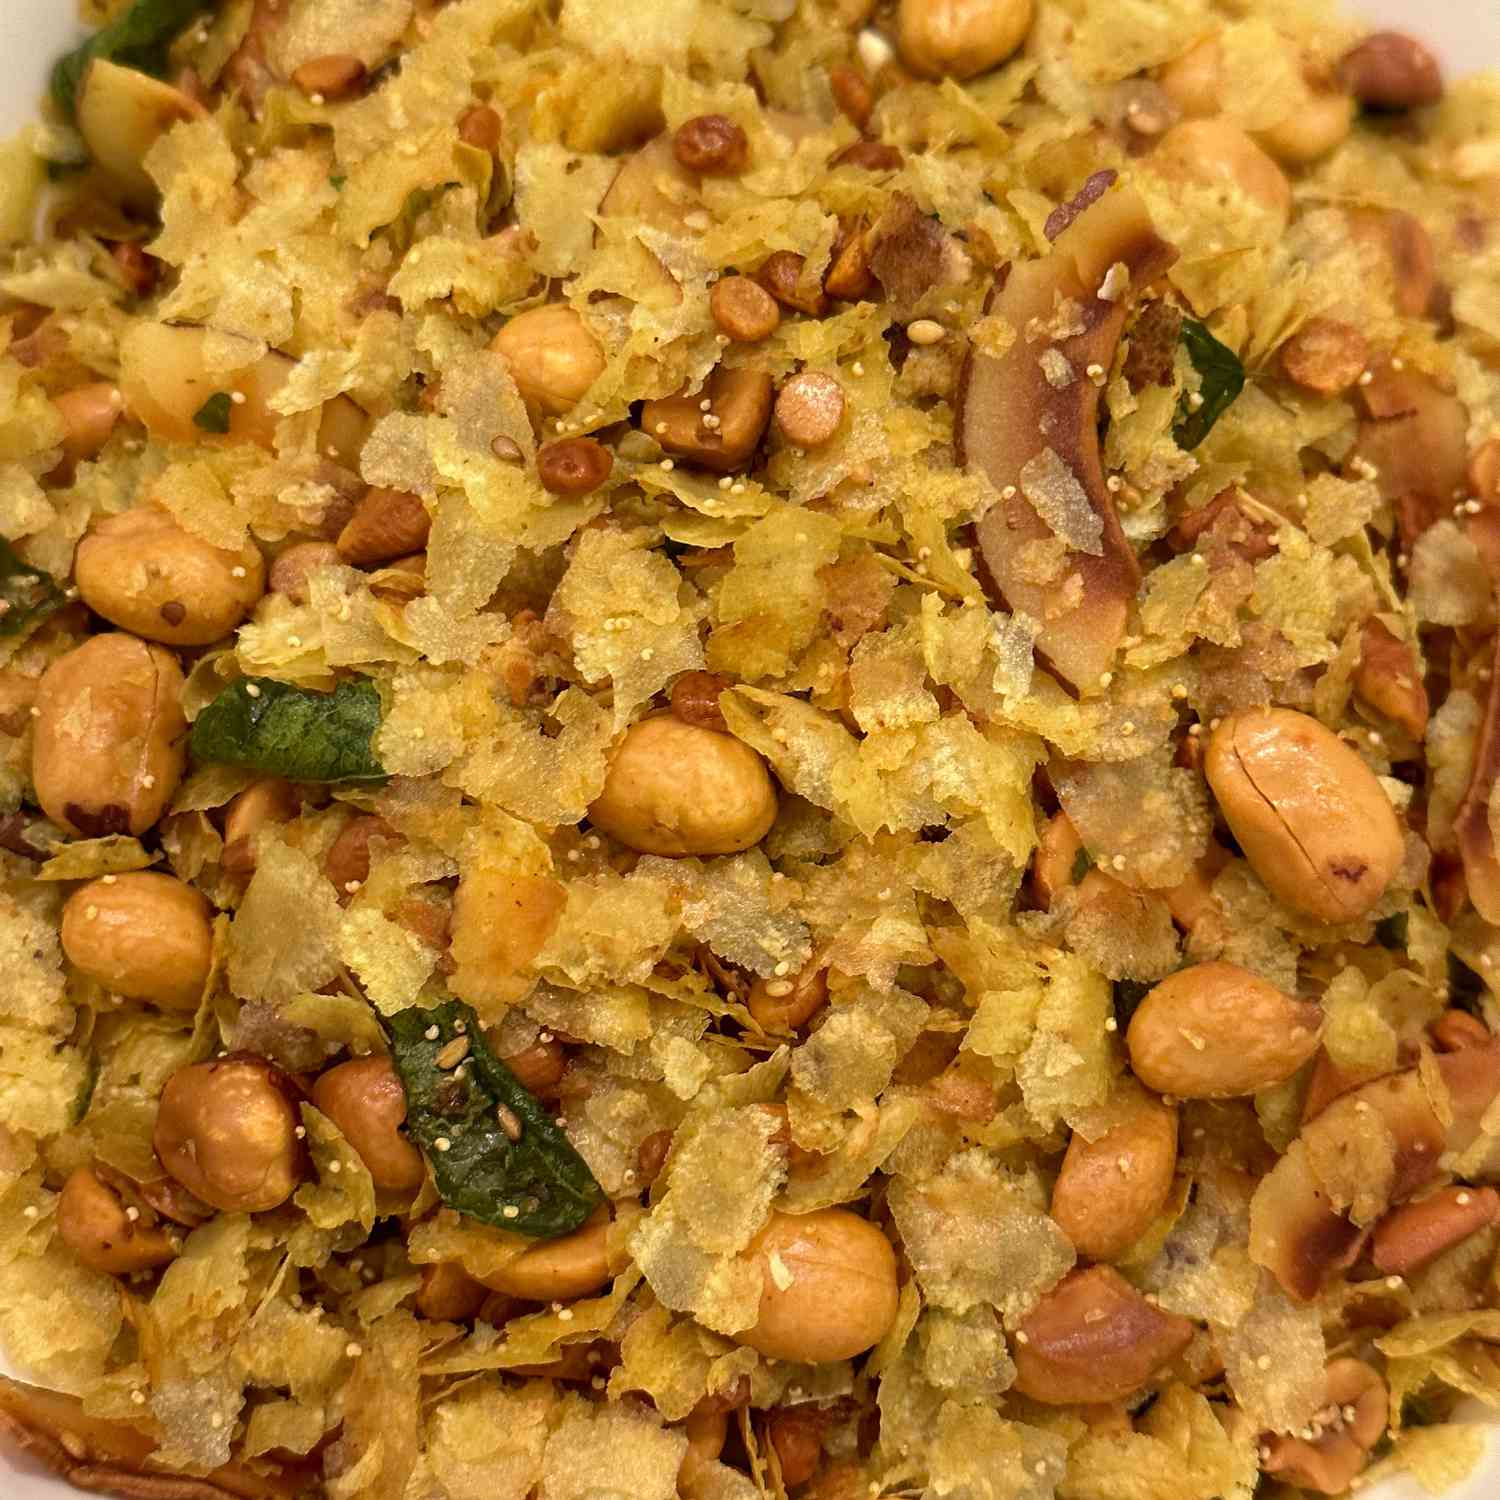 This Sweet and Savory Indian Snack Has a Big Crunch Factor